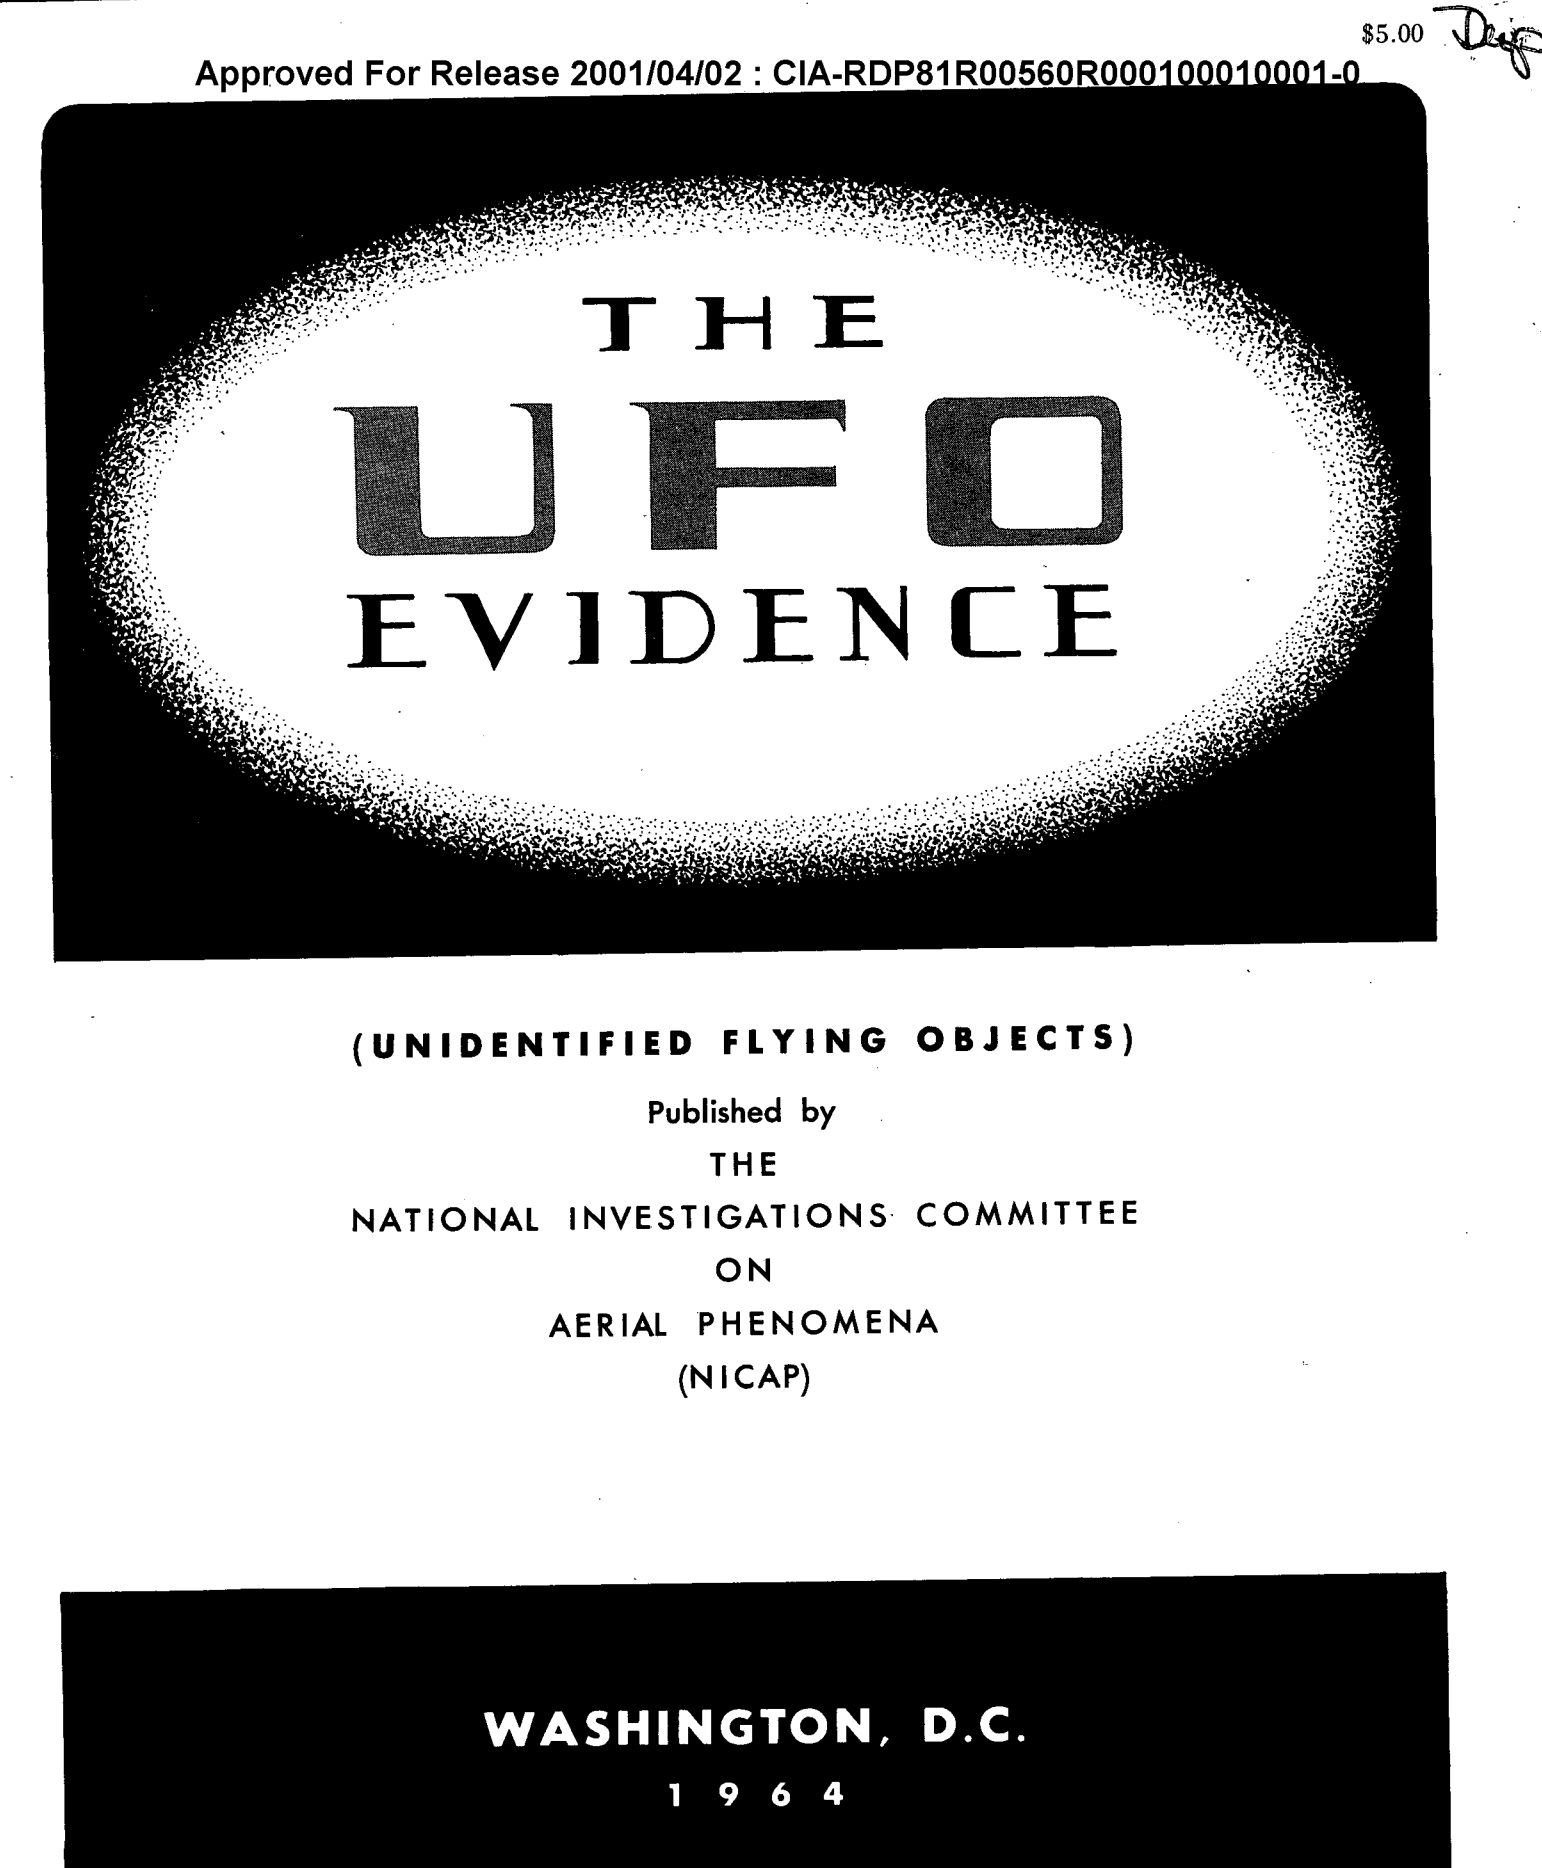 How the CIA Made a Checklist on Photographing UFO Sightings